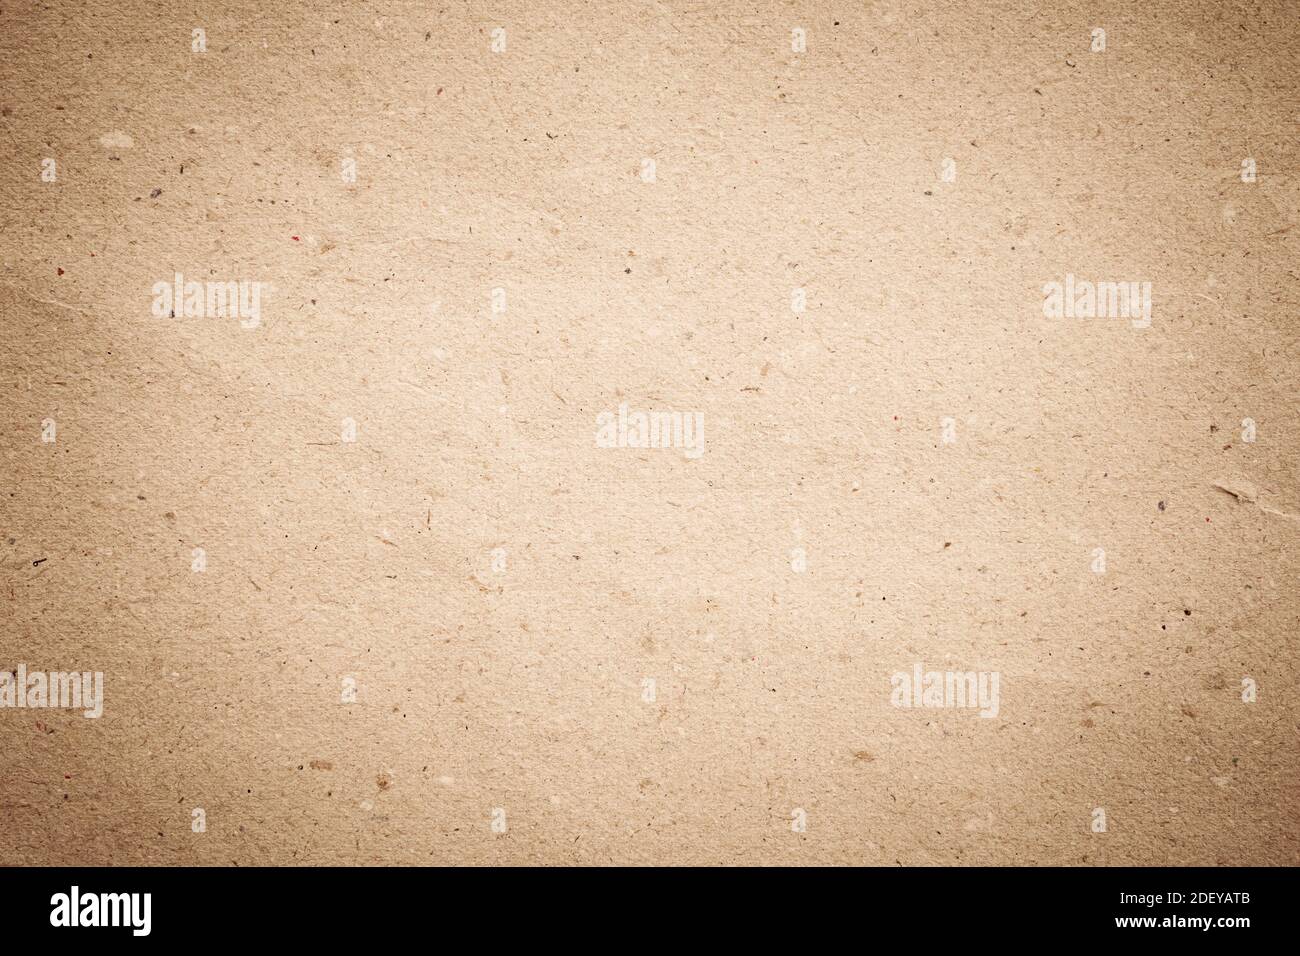 brown vintage style paper texture background Stock Photo